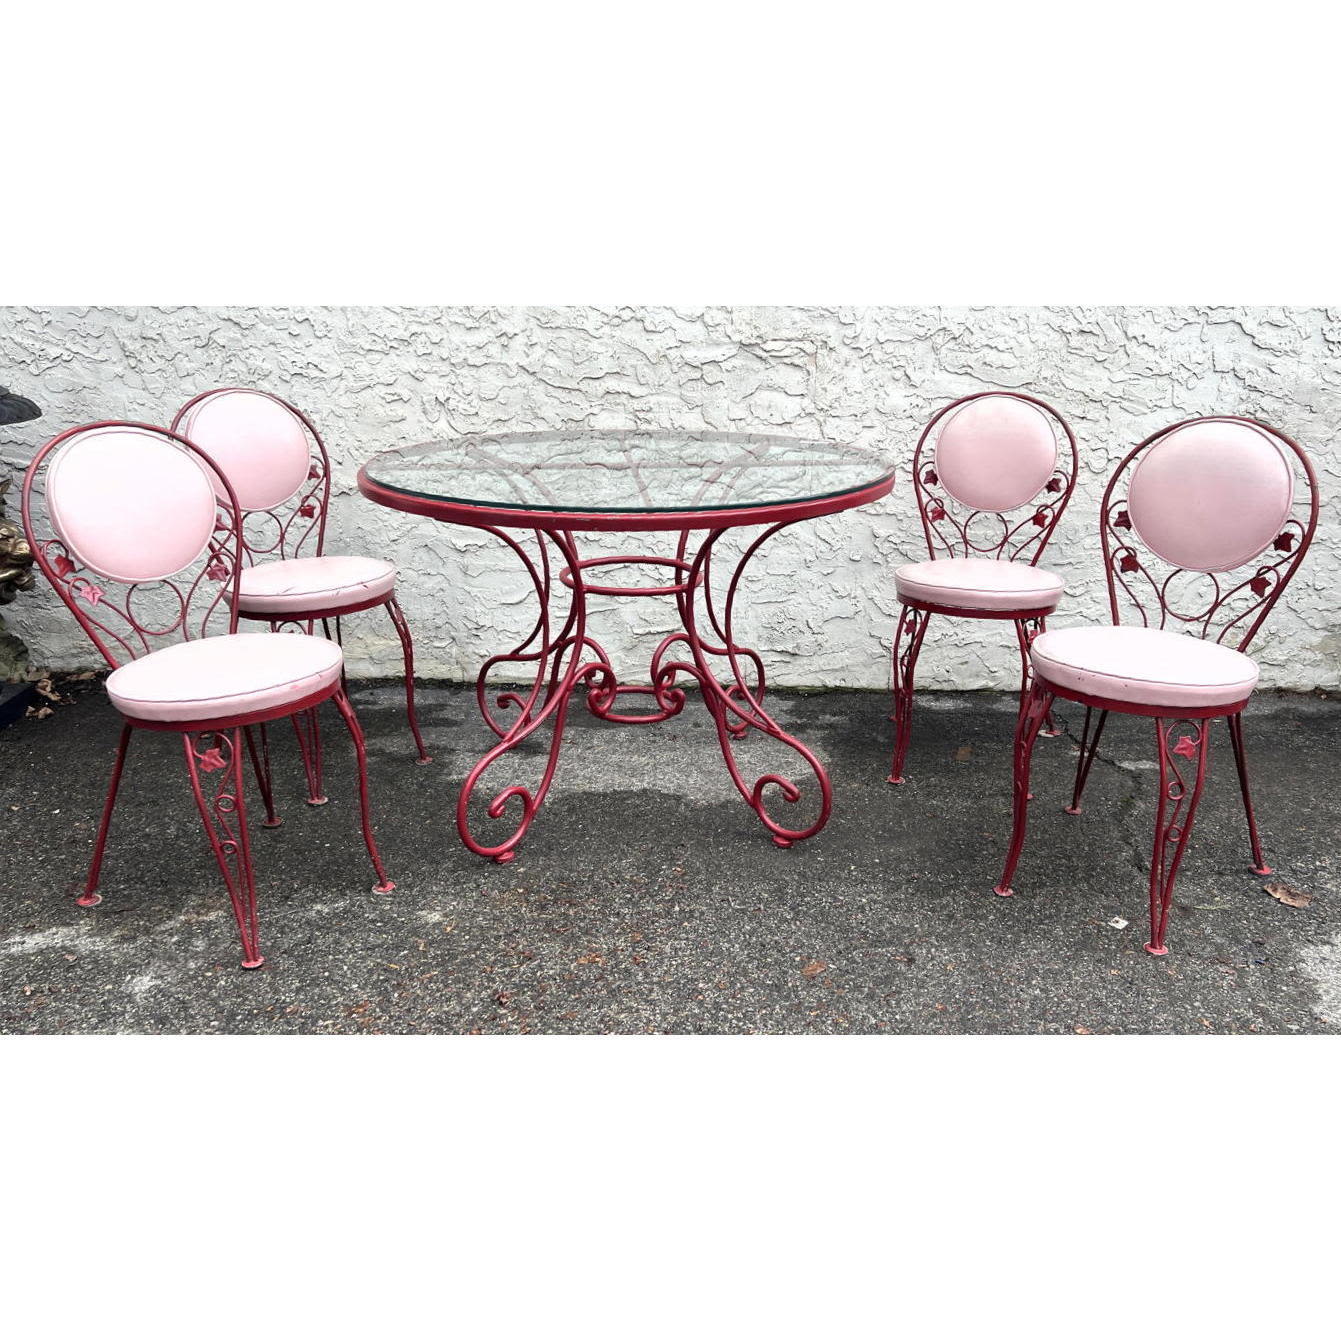 5pc Painted Red Iron Cafe Table